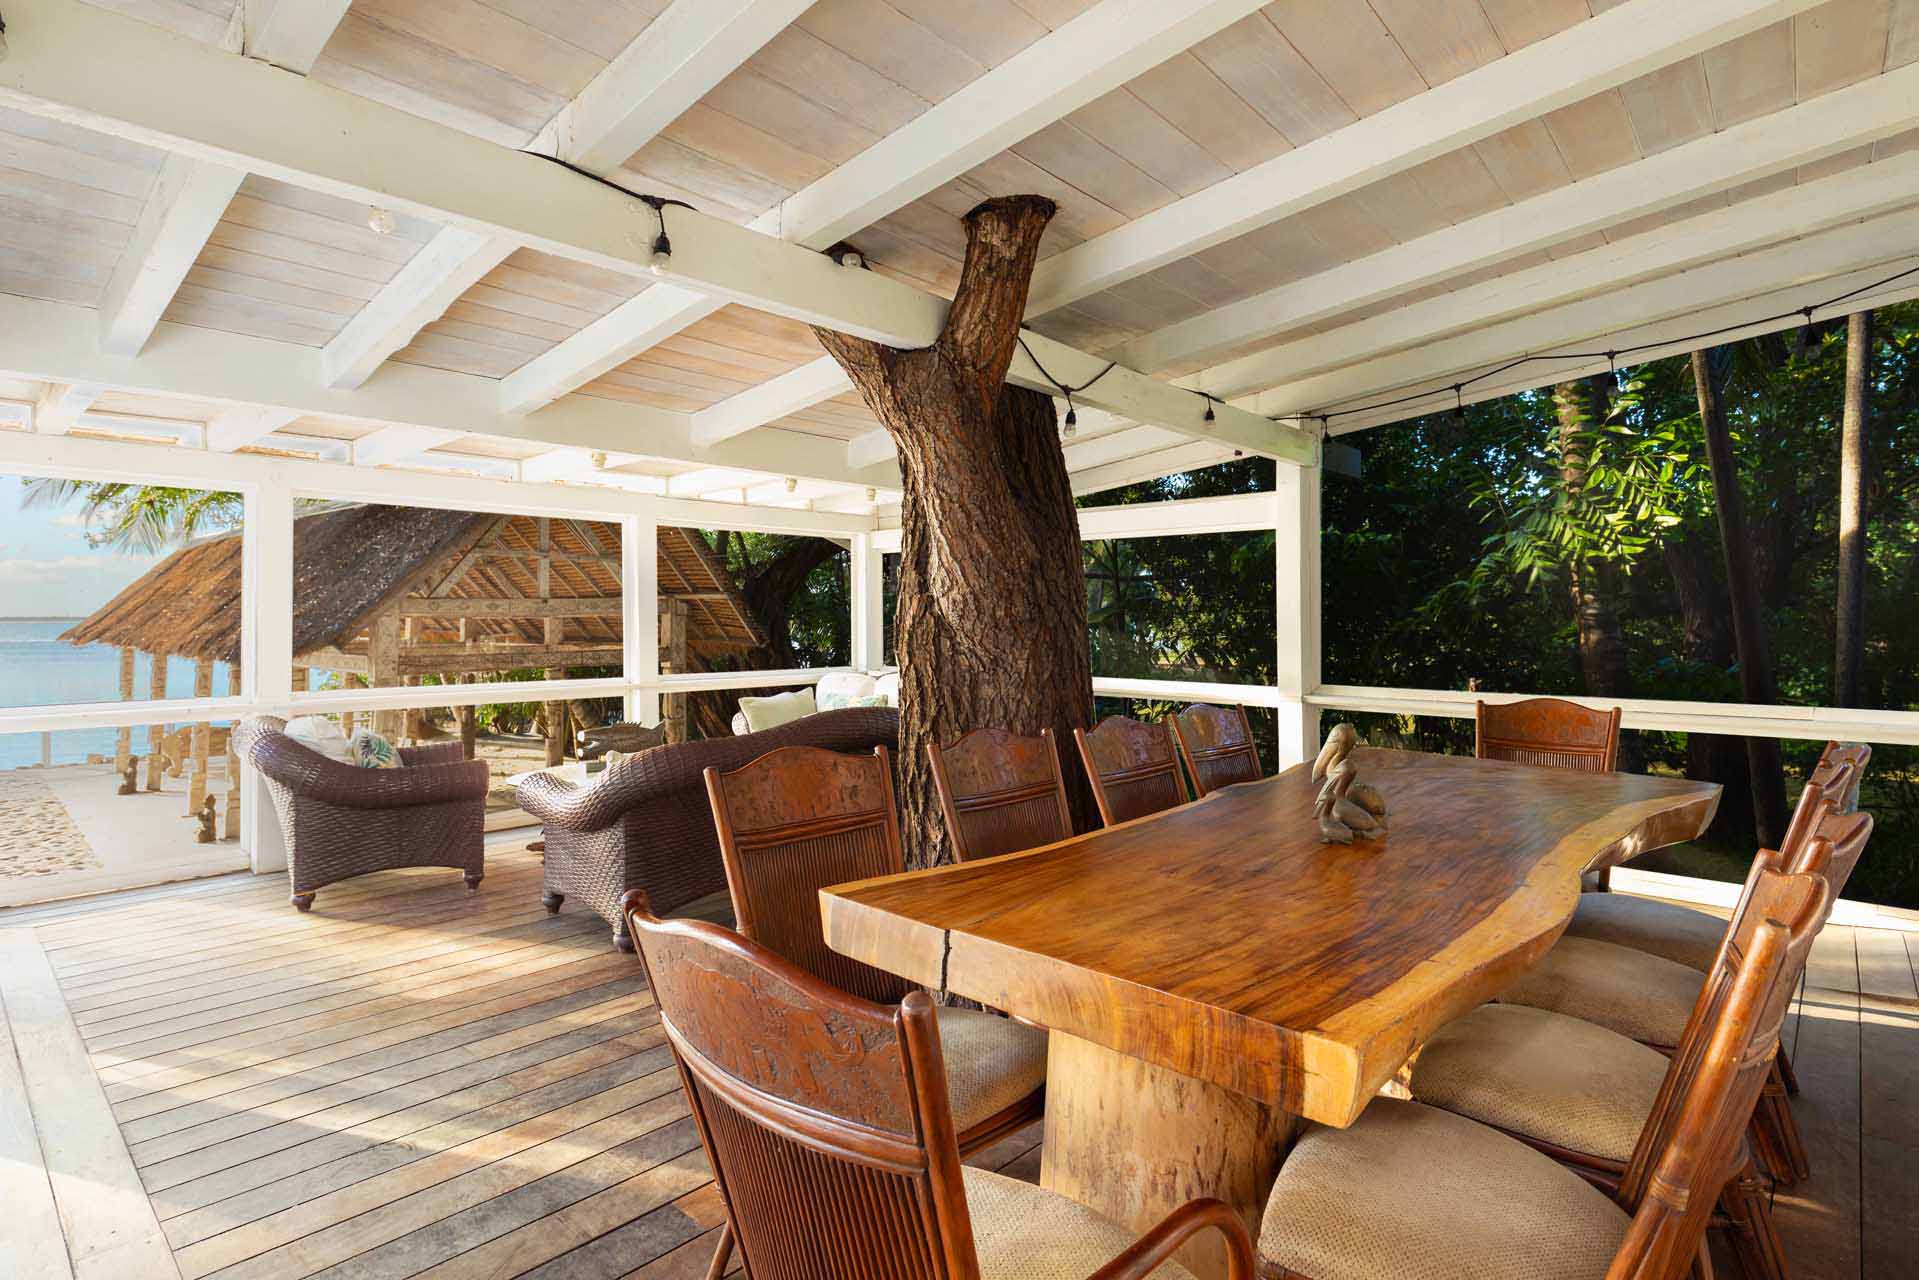 Grand Lodge furnished and covered outdoor deck with ocean views